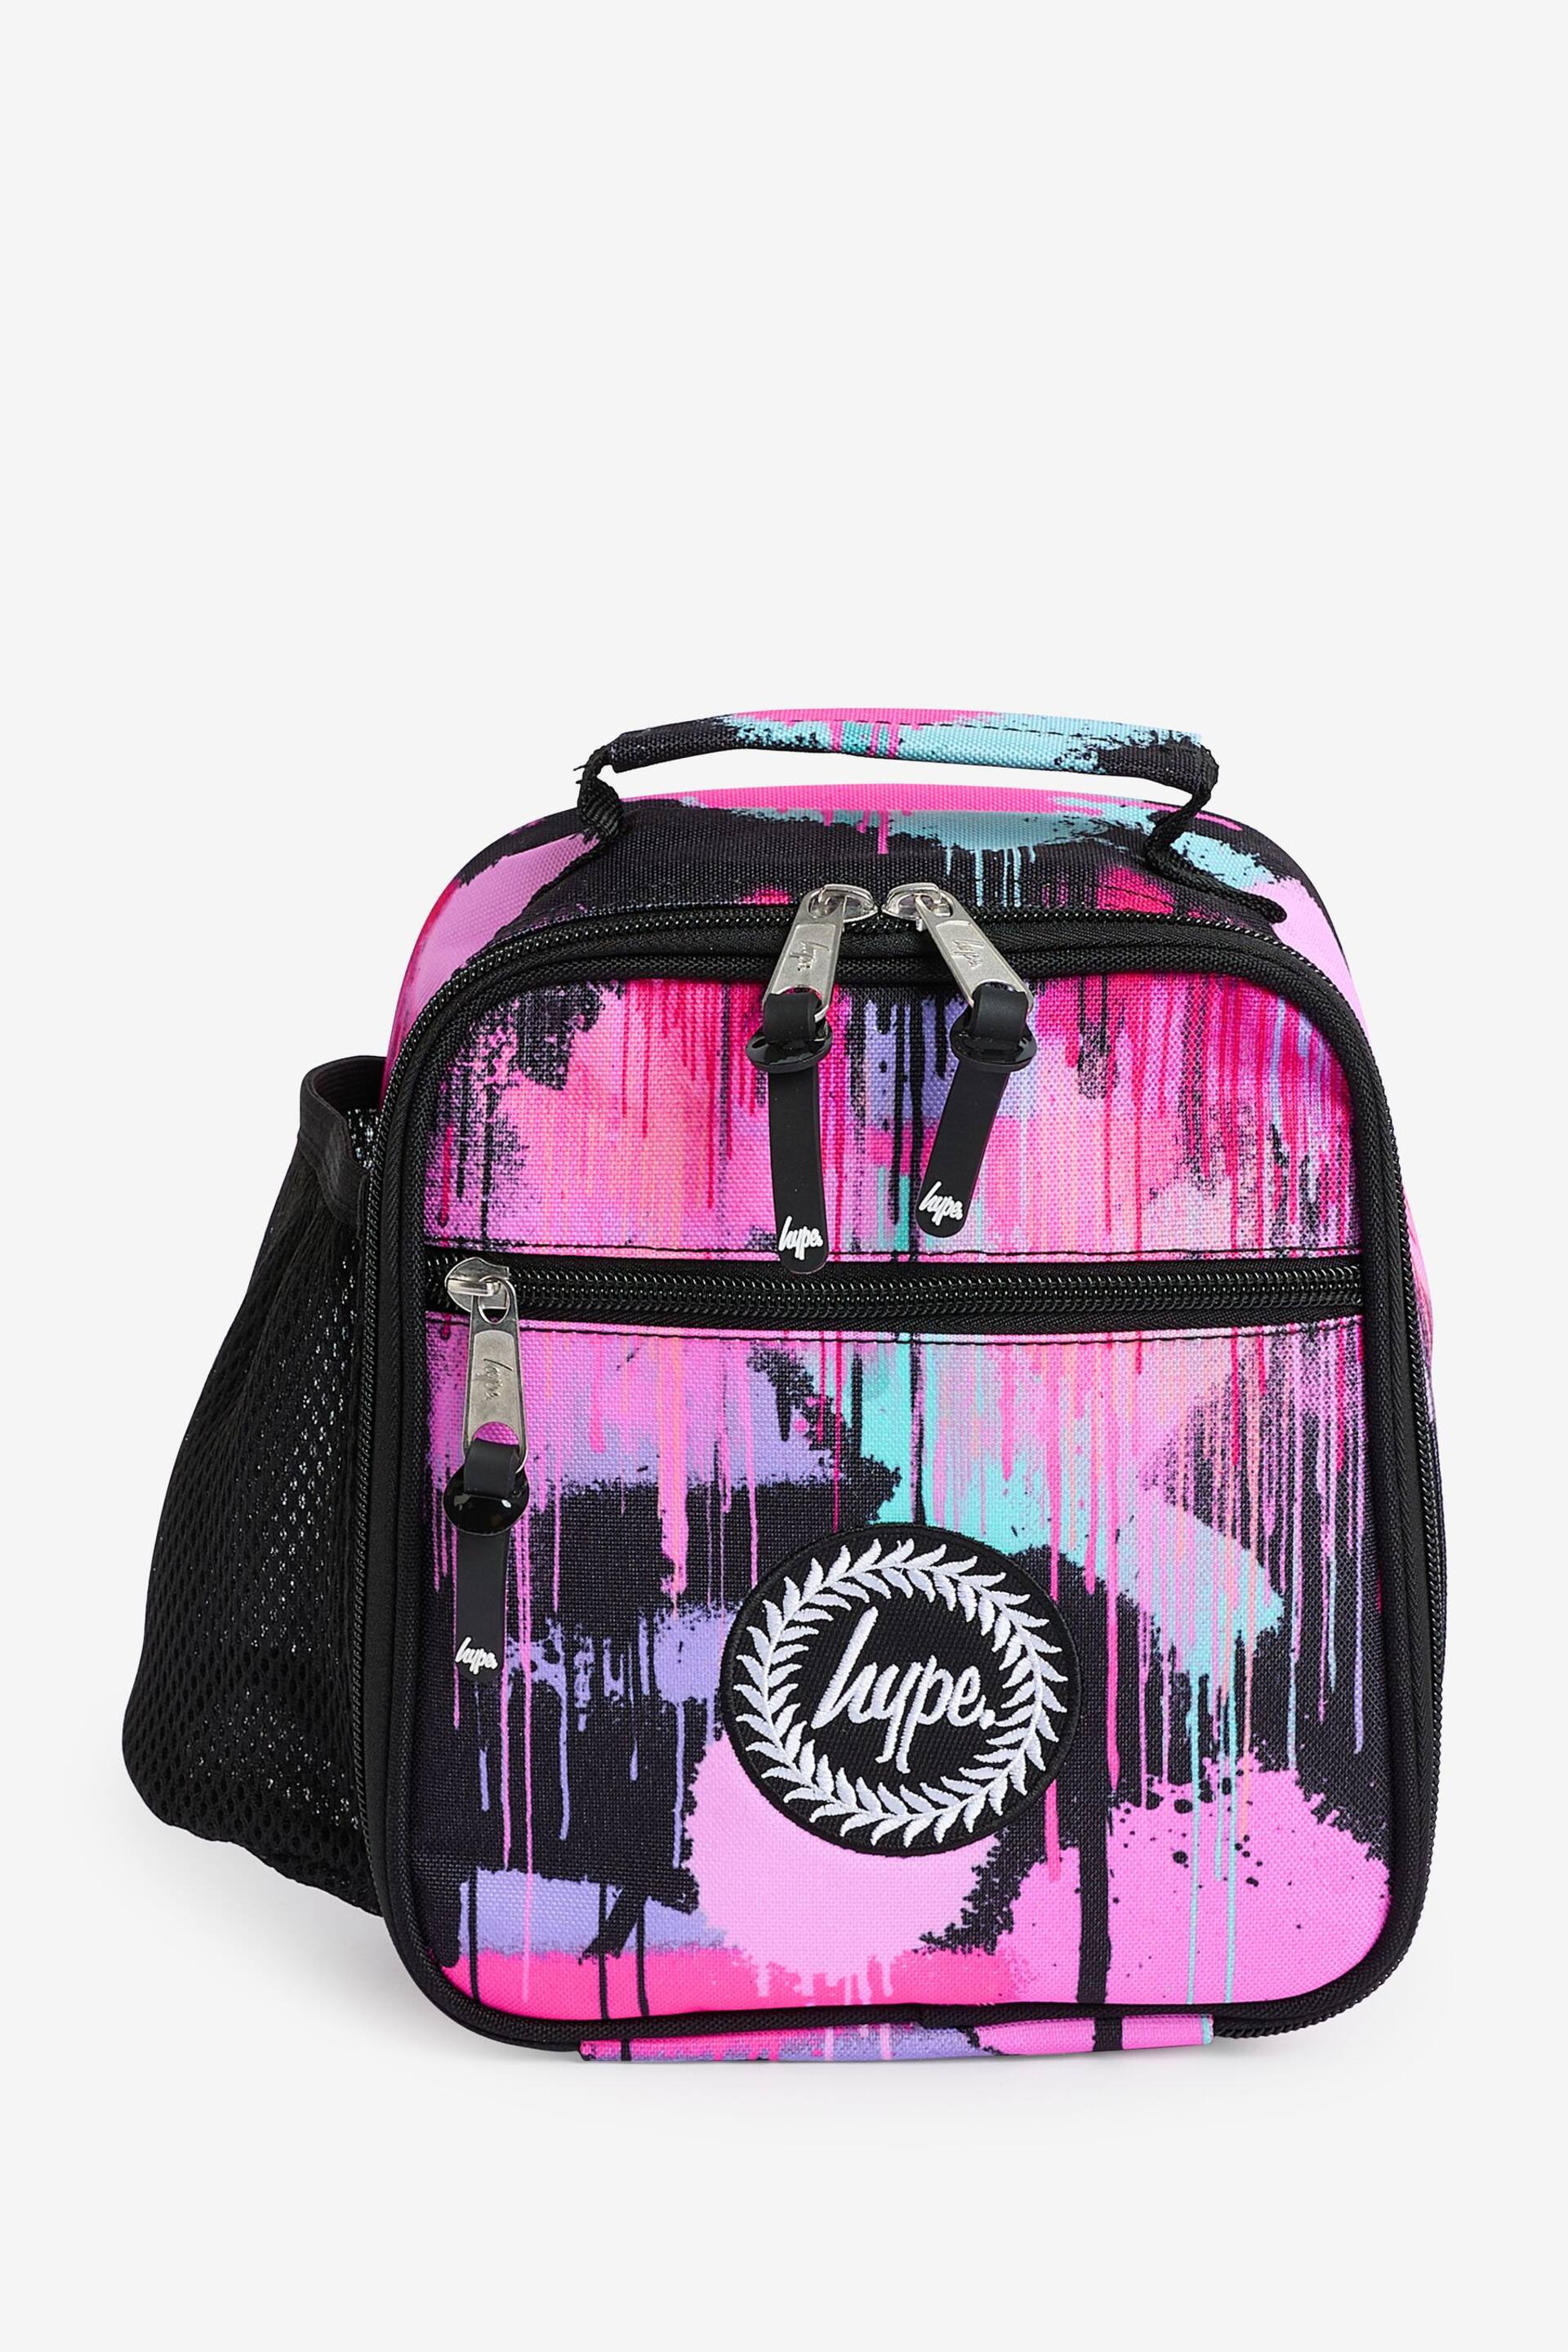 Hype. Spray Paint V2 Lunch Box - Image 1 of 1